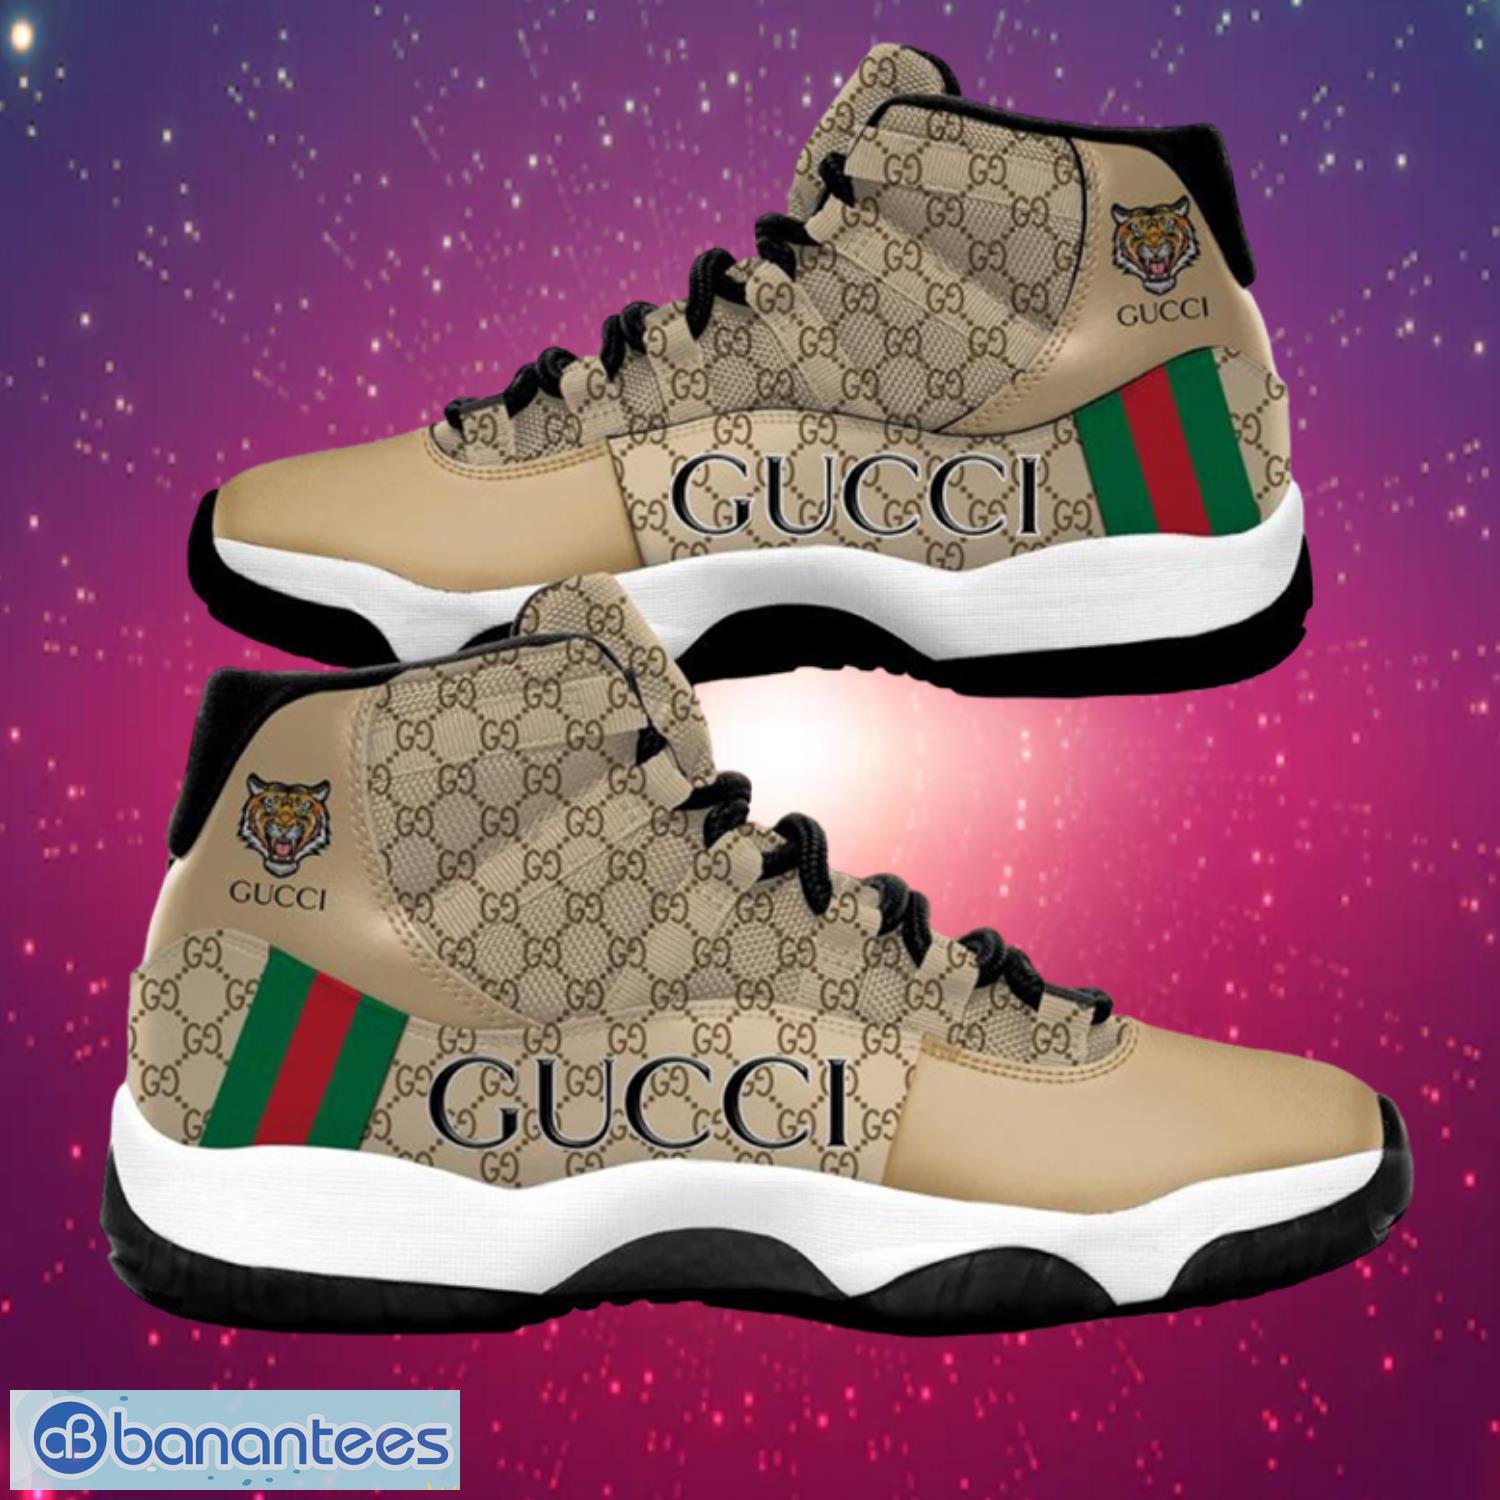 Gucci Tiger Luxury Air Jordan 11 Shoes Product Photo 1